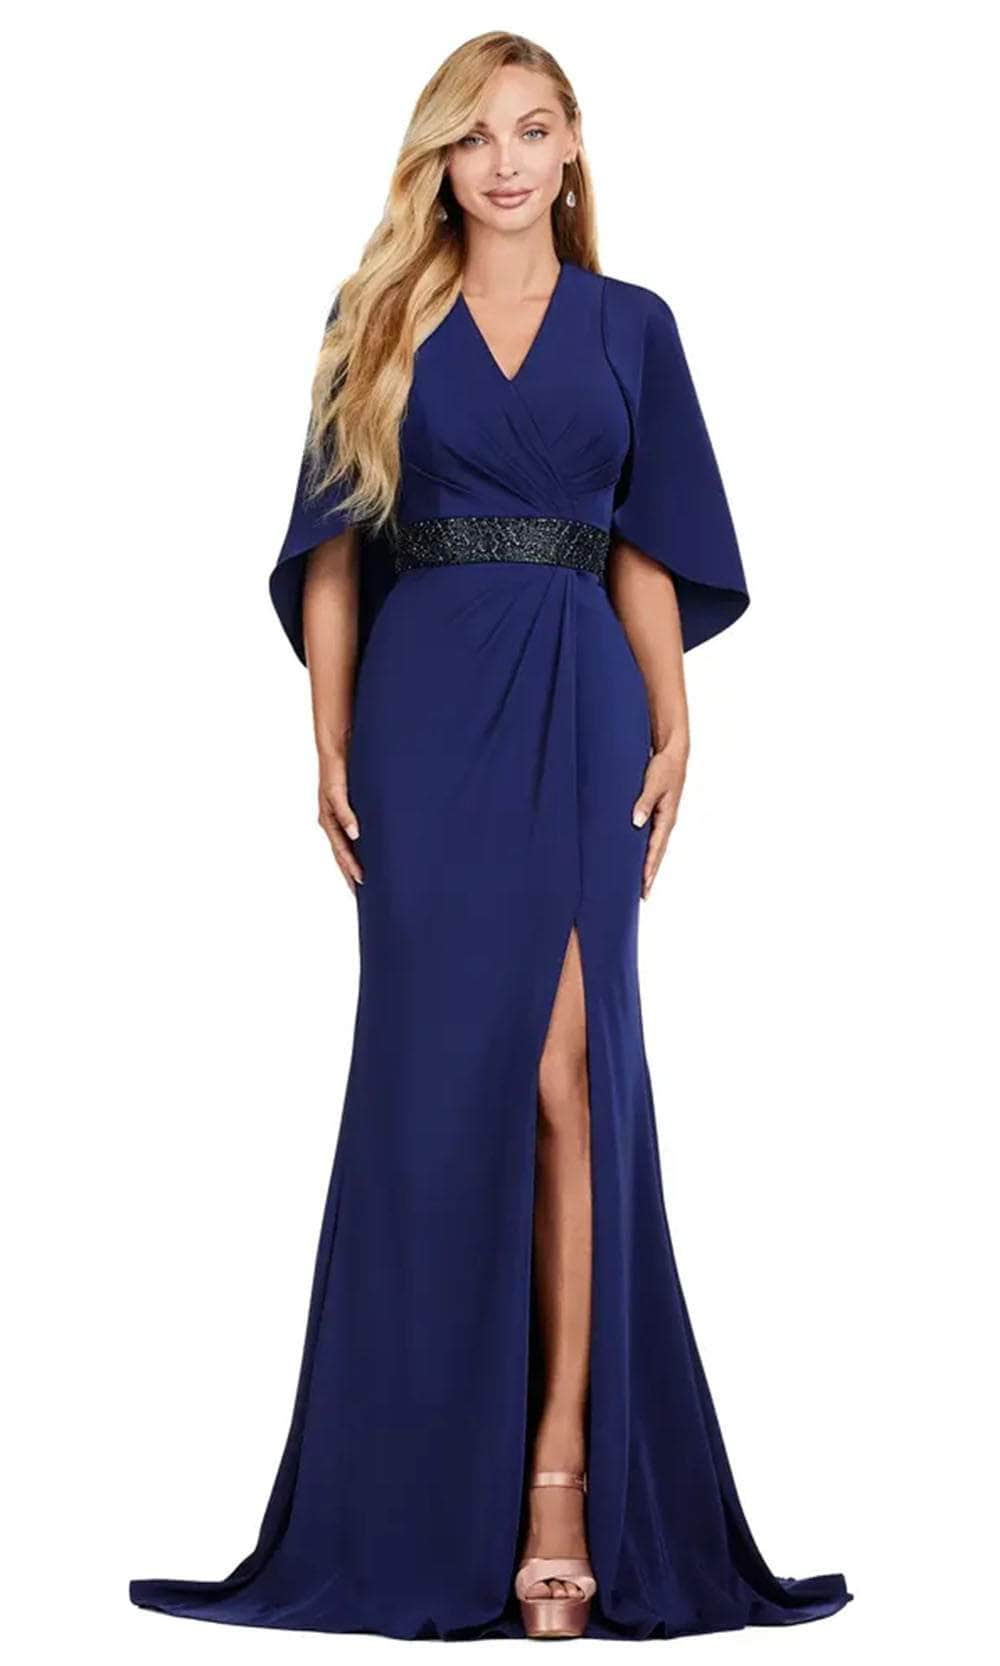 Ashley Lauren 11416 - V Neck Gown with Cape
